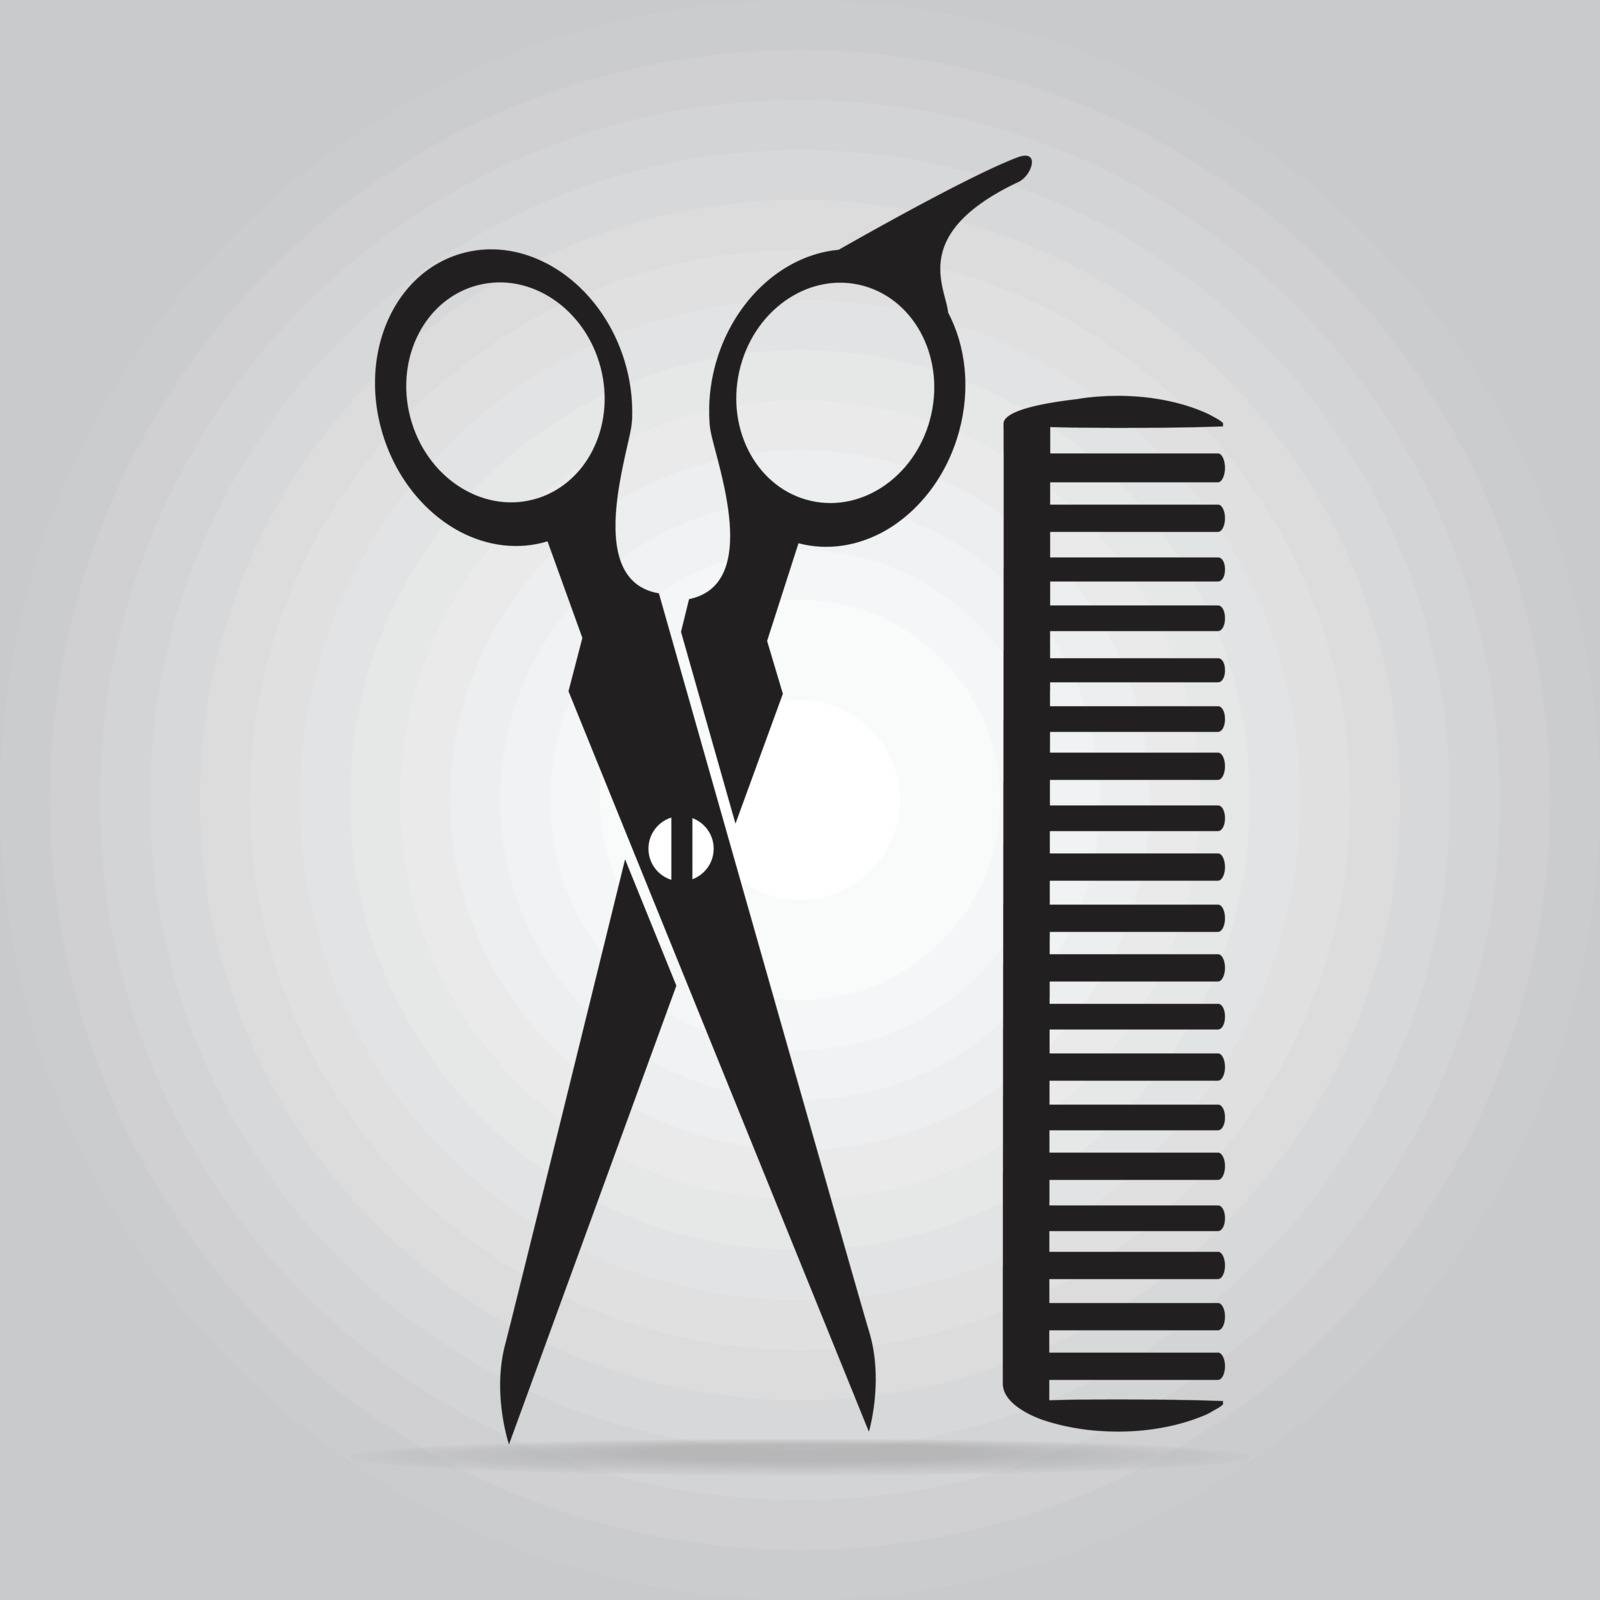 Hair salon with scissors and comb icon, vector illustration